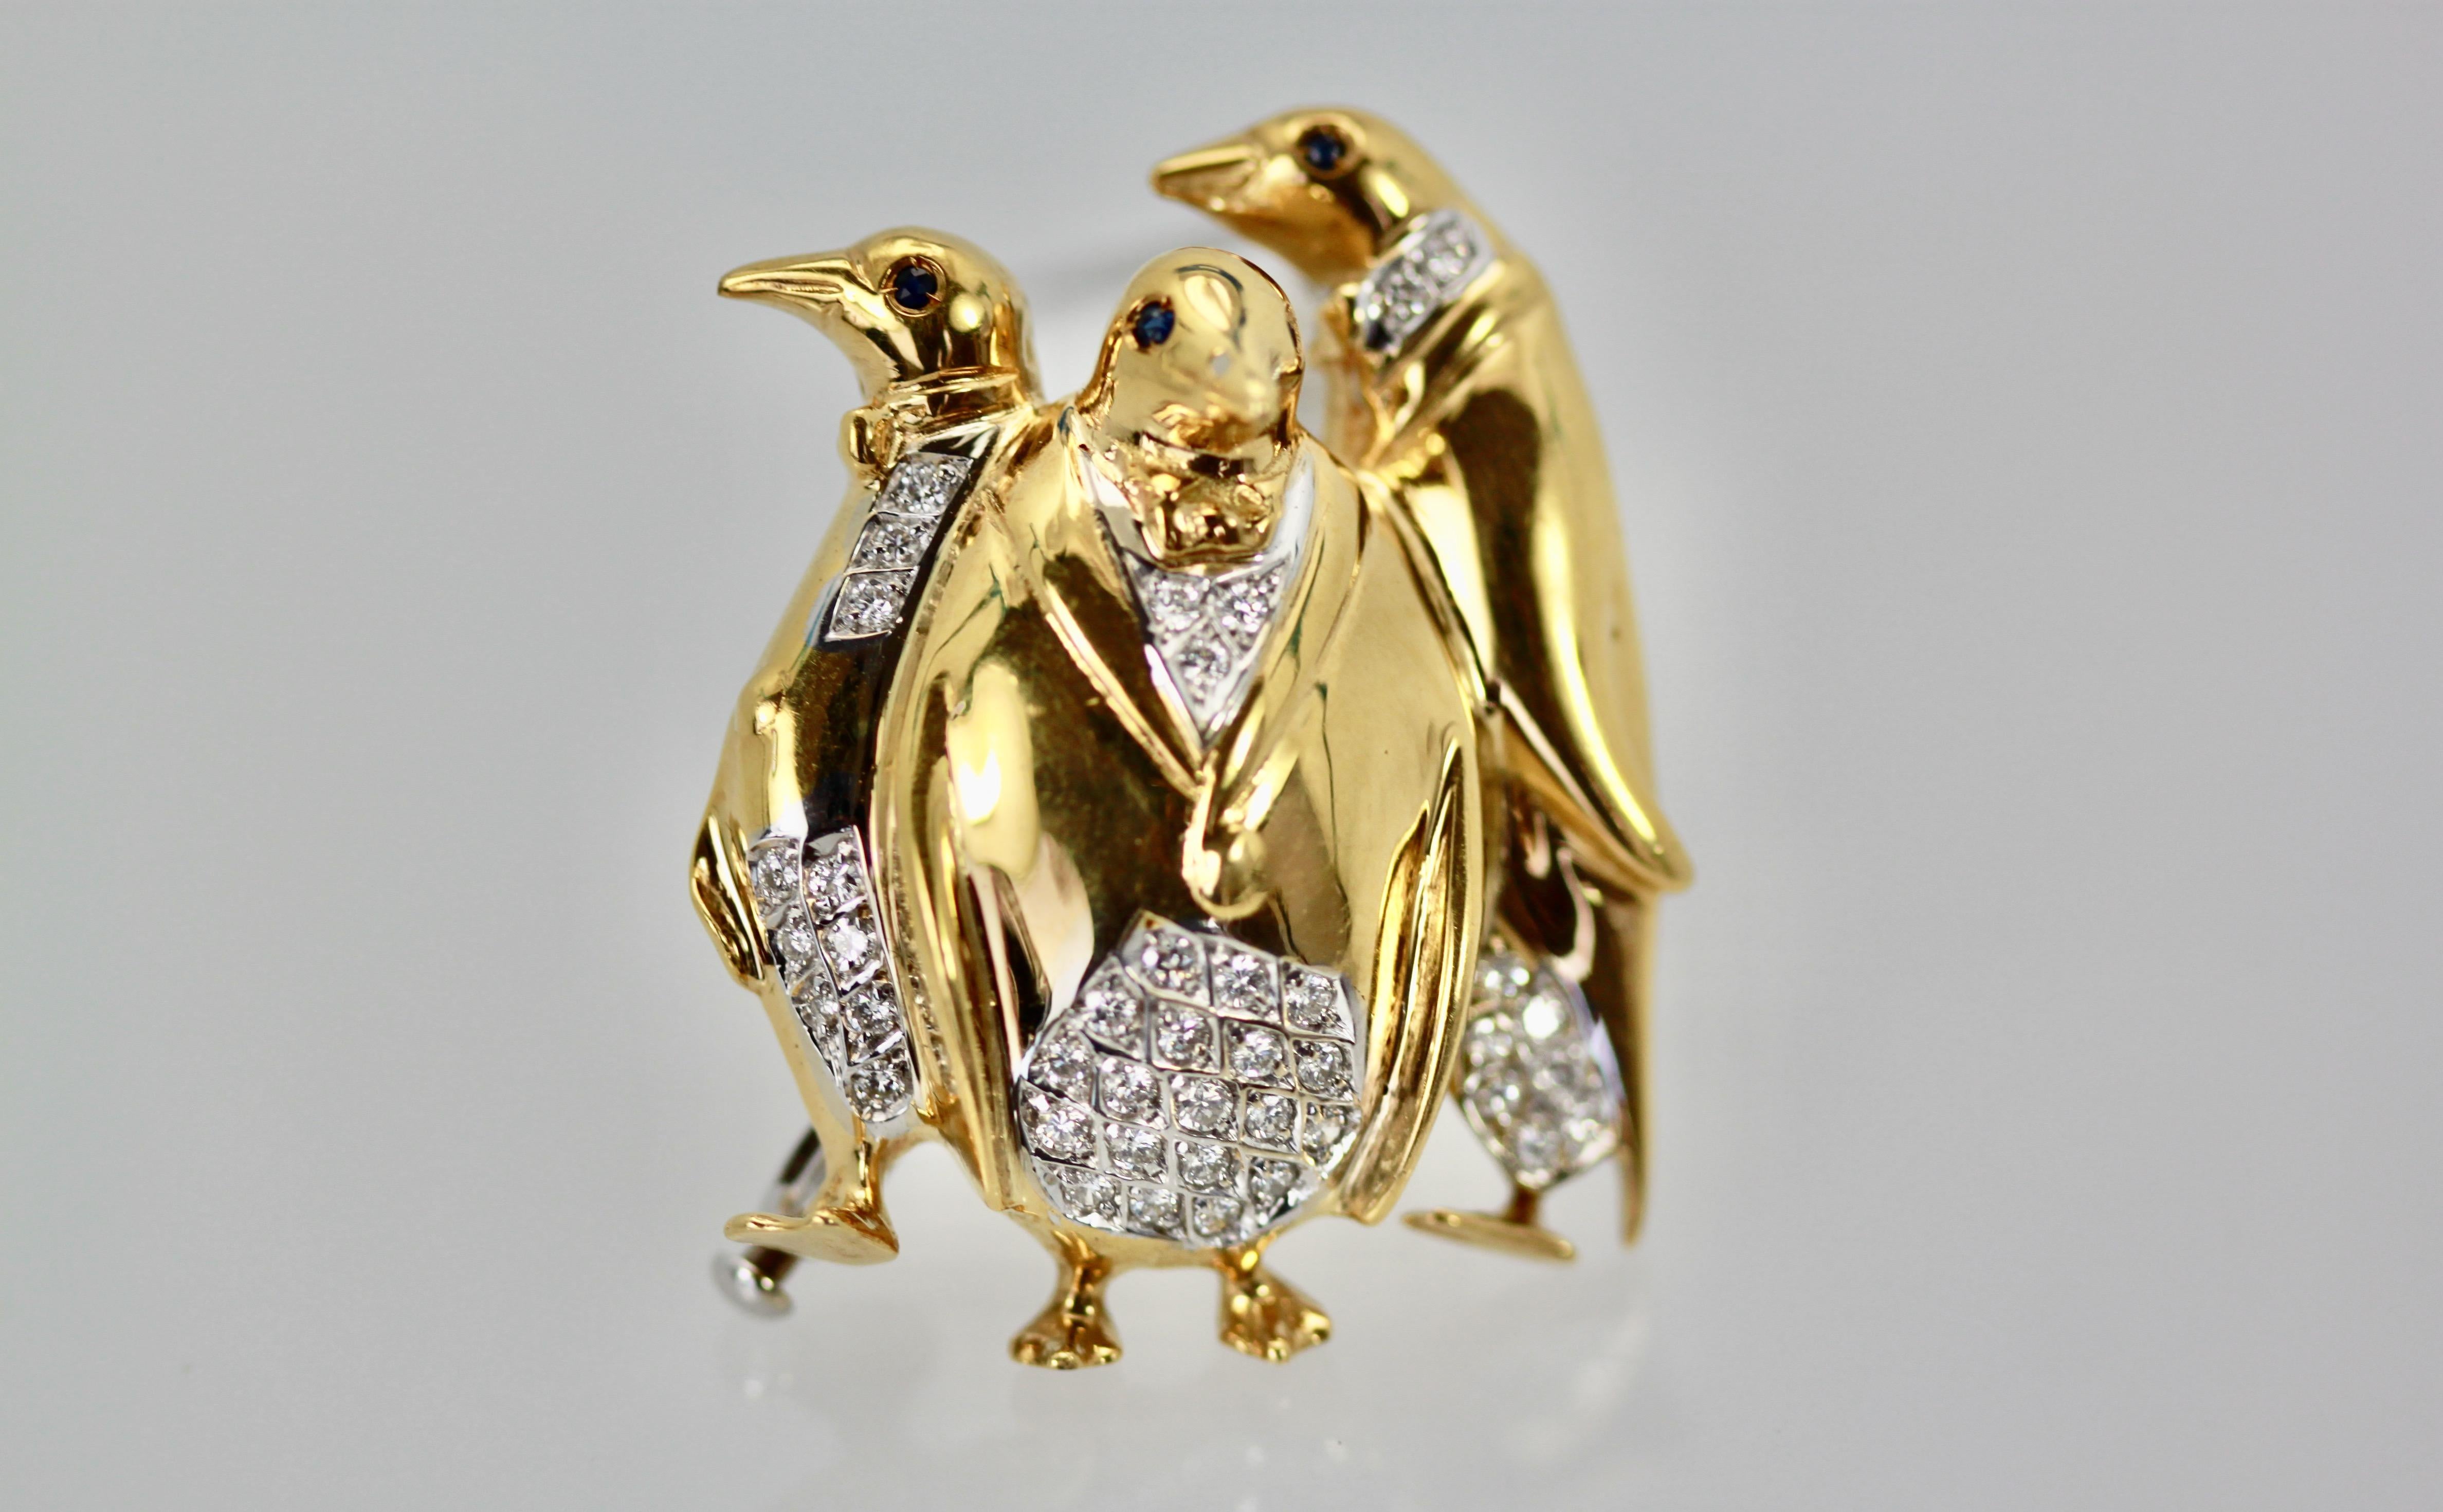 This delightful Italian Penguin brooch features 3 penguins with Diamond inserts.  It weighs 16.6 grams and measures 35cm x 28cm. Thee are 43 Diamonds grace the collar, throat and bottom of body.  Four Ruby eyes and a double clasp. This is a perfect